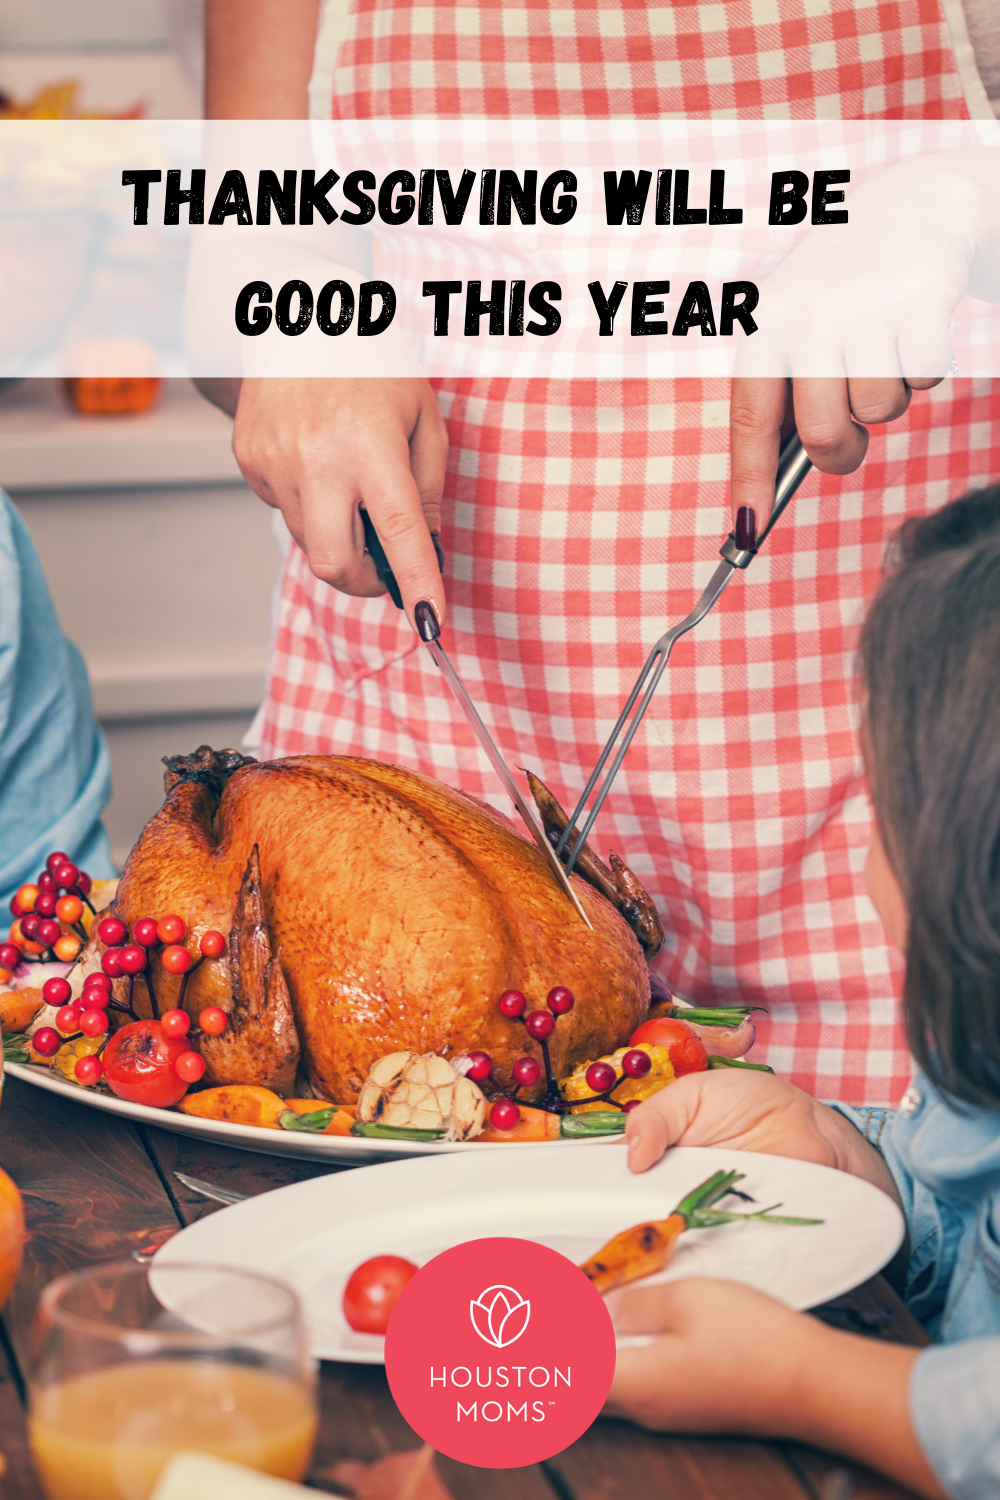 Houston Moms "Thanksgiving will Be Good This Year" #houstonmoms #houstonmomsblog #momsaroundhouston